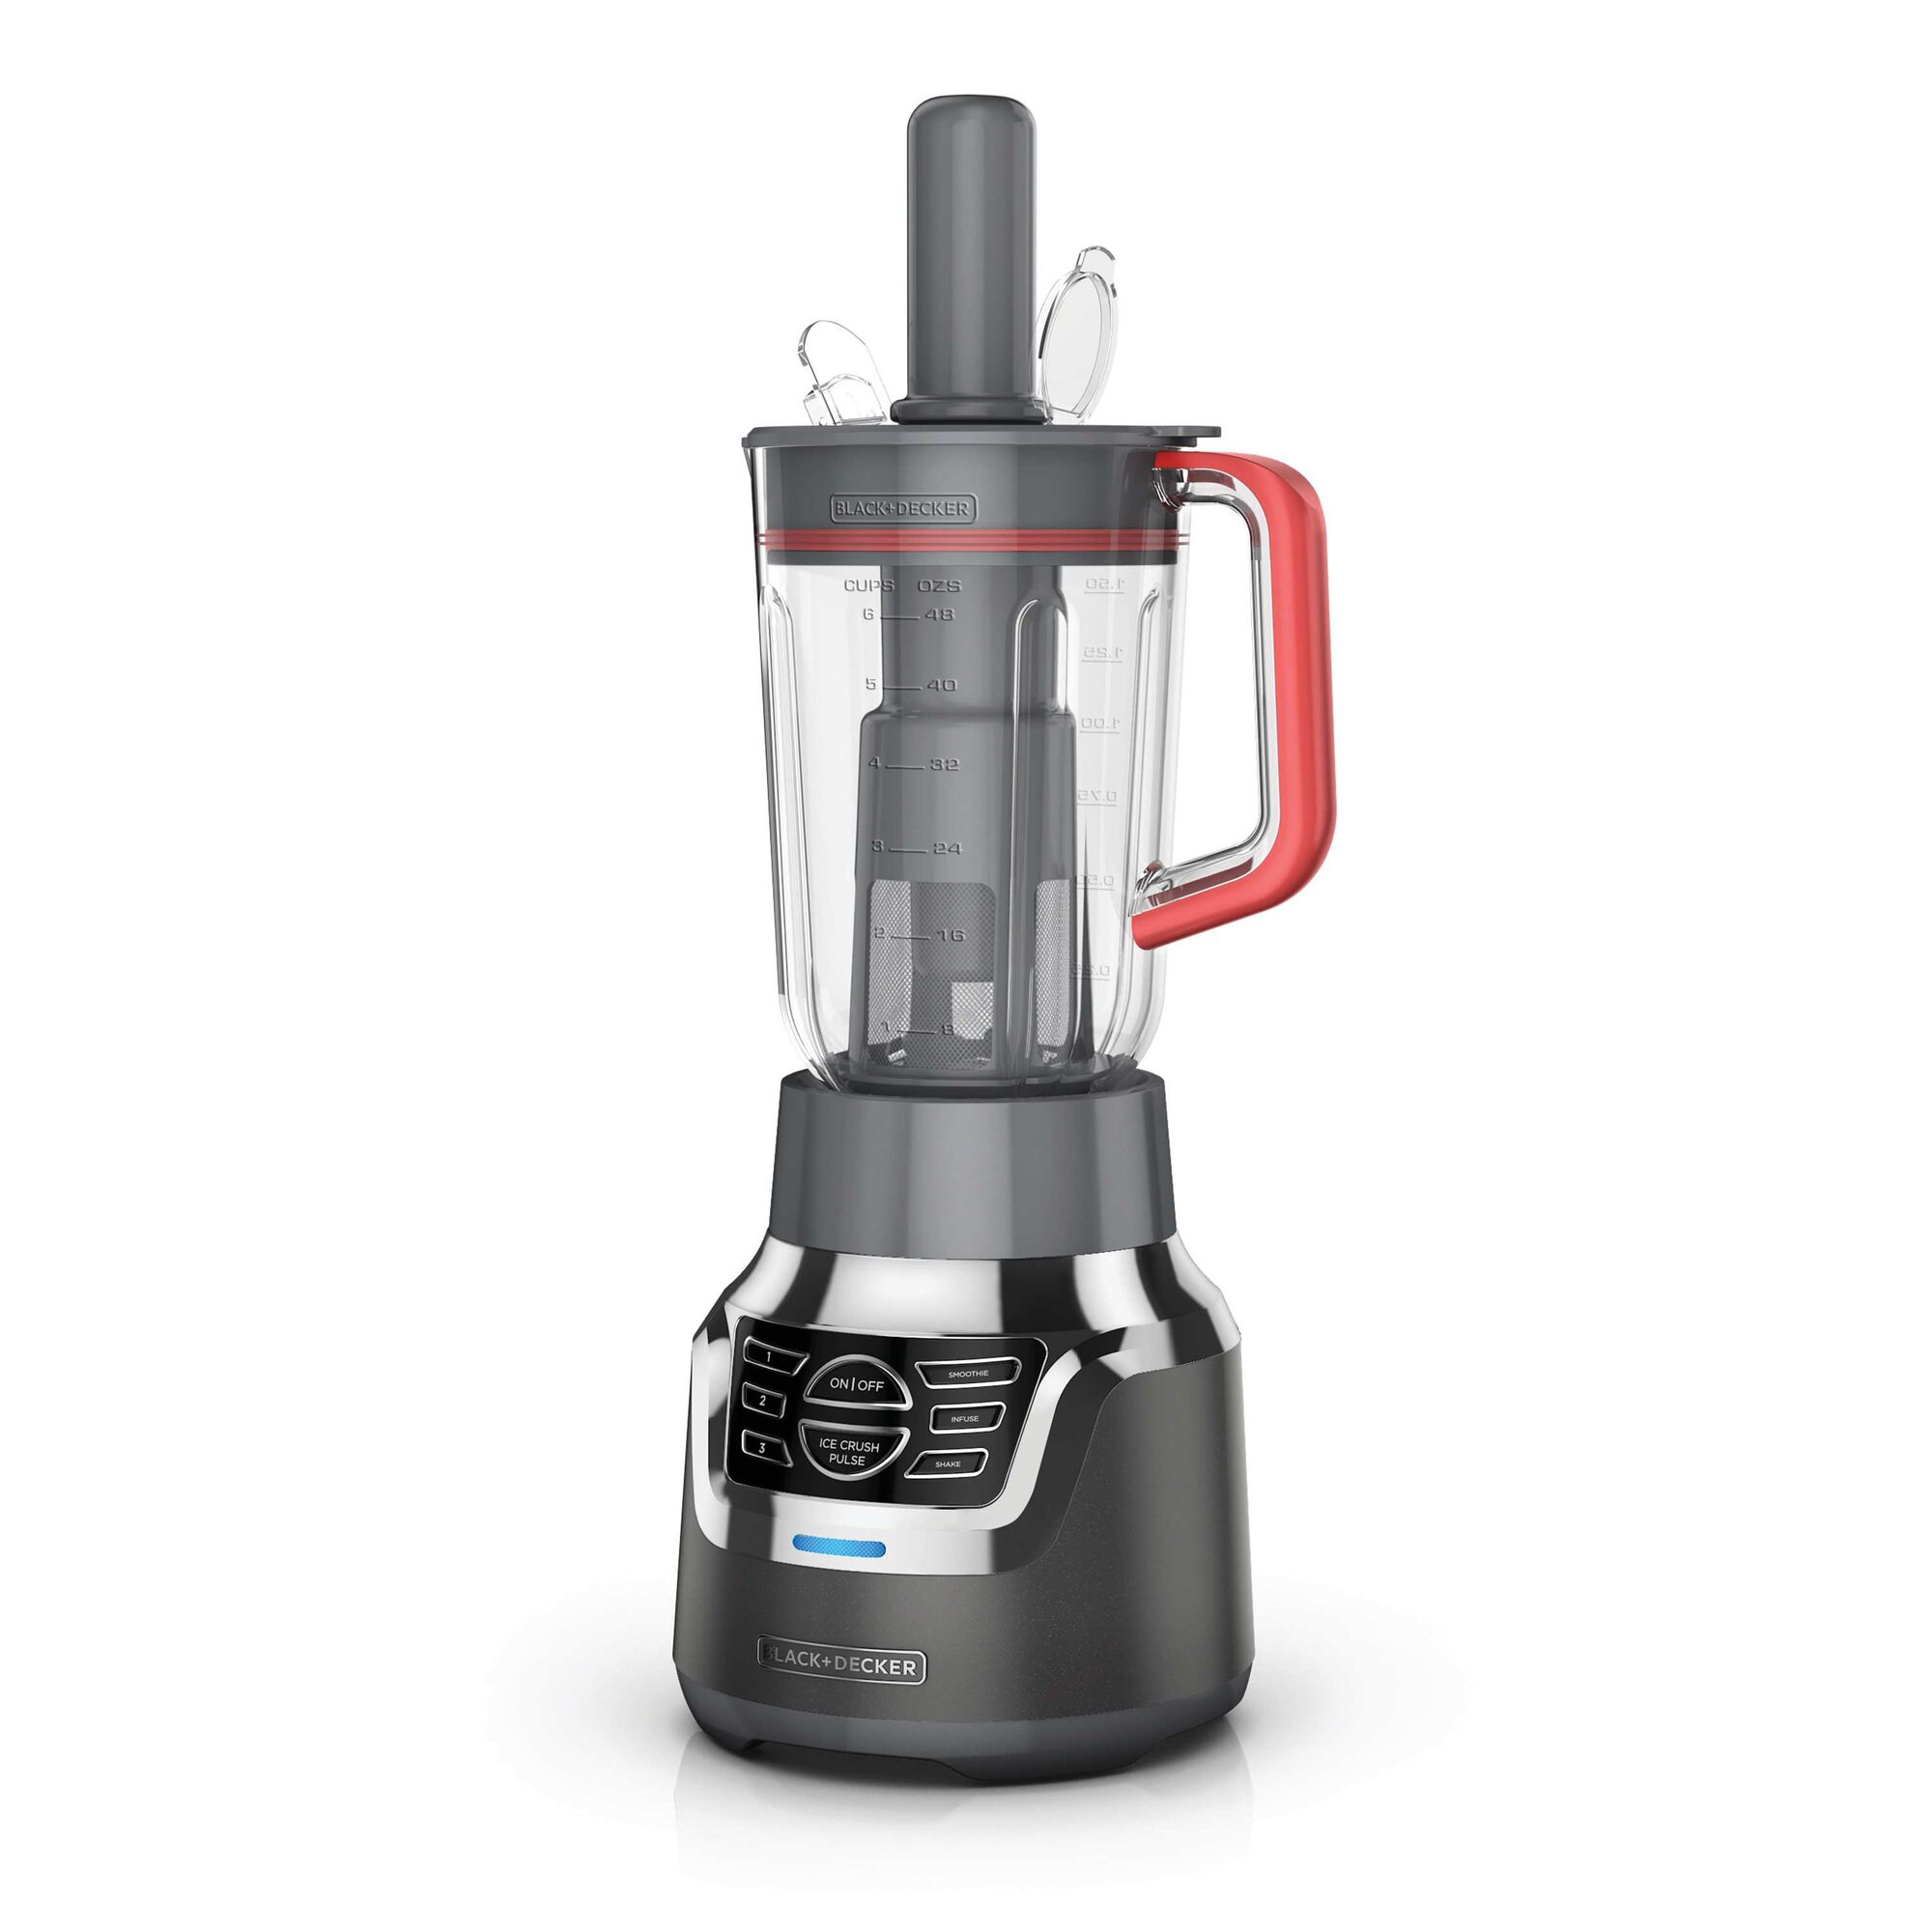 Profile of Infuser blender of Infuser 3 In 1 Digital PowerCrush Blending System with 6 Cup Tritan Jar and 18 ounce Tritan Personal Jar.